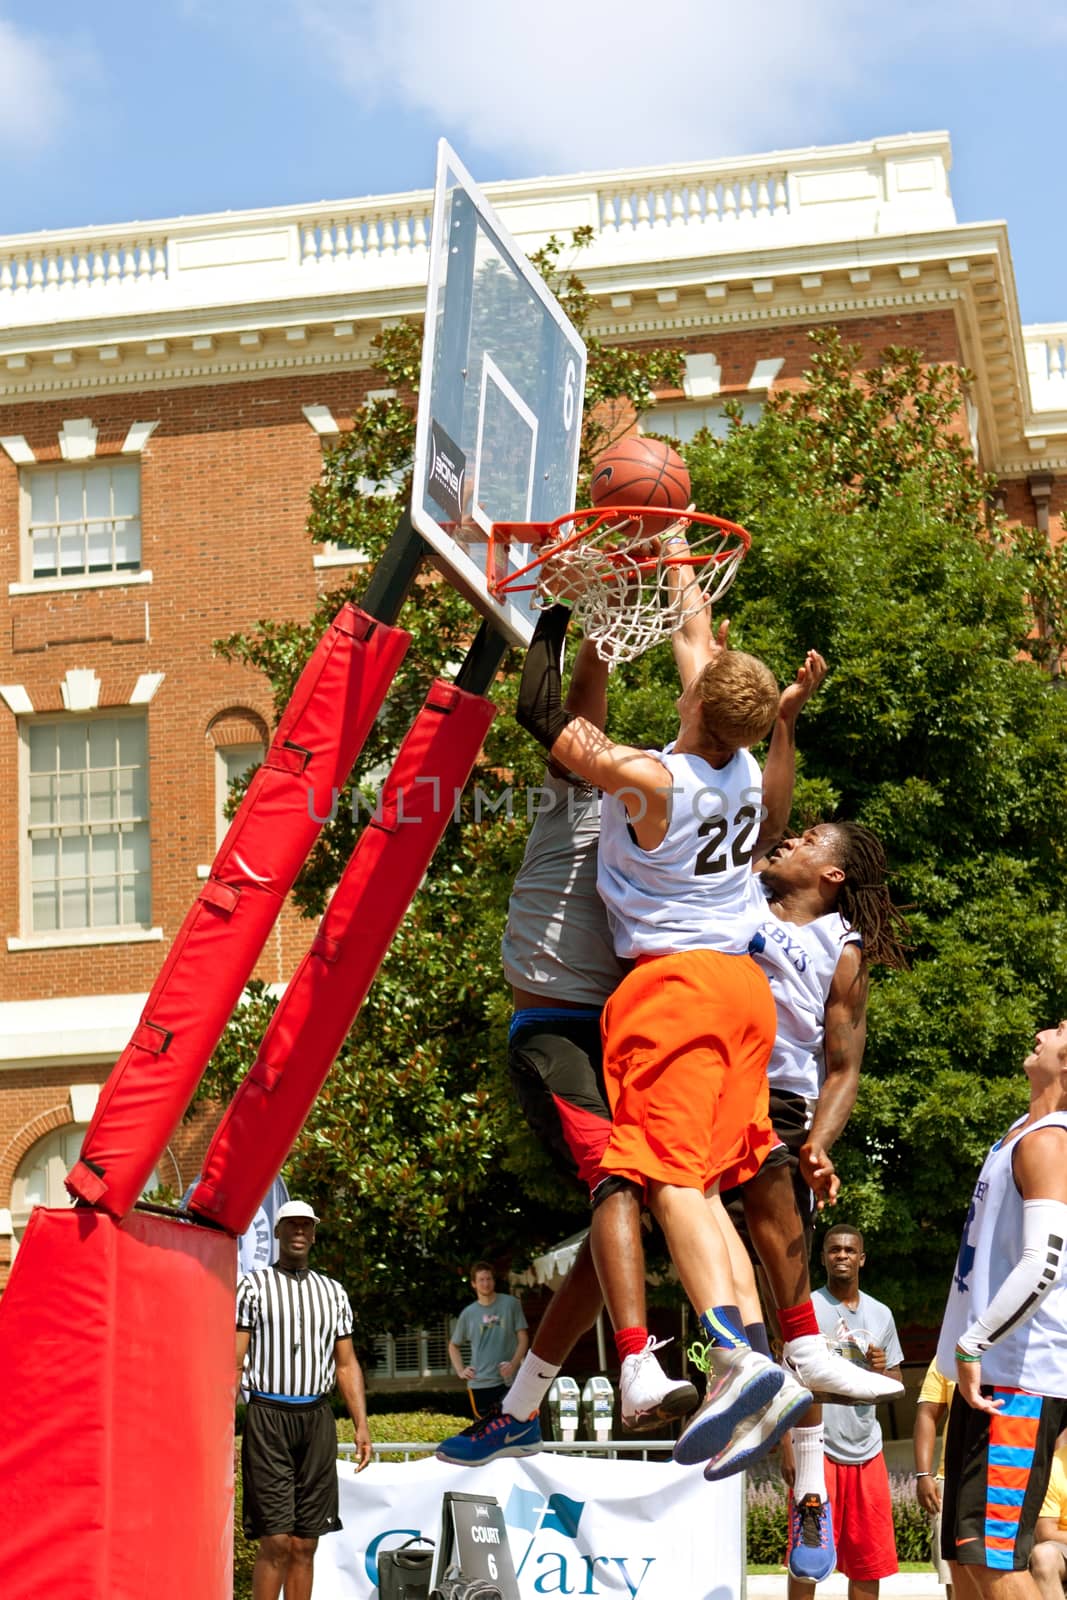 Athens, GA, USA - August 24, 2013:  Three men fight for the ball above the rim, in a 3-on-3 basketball tournament held on the streets of downtown Athens.